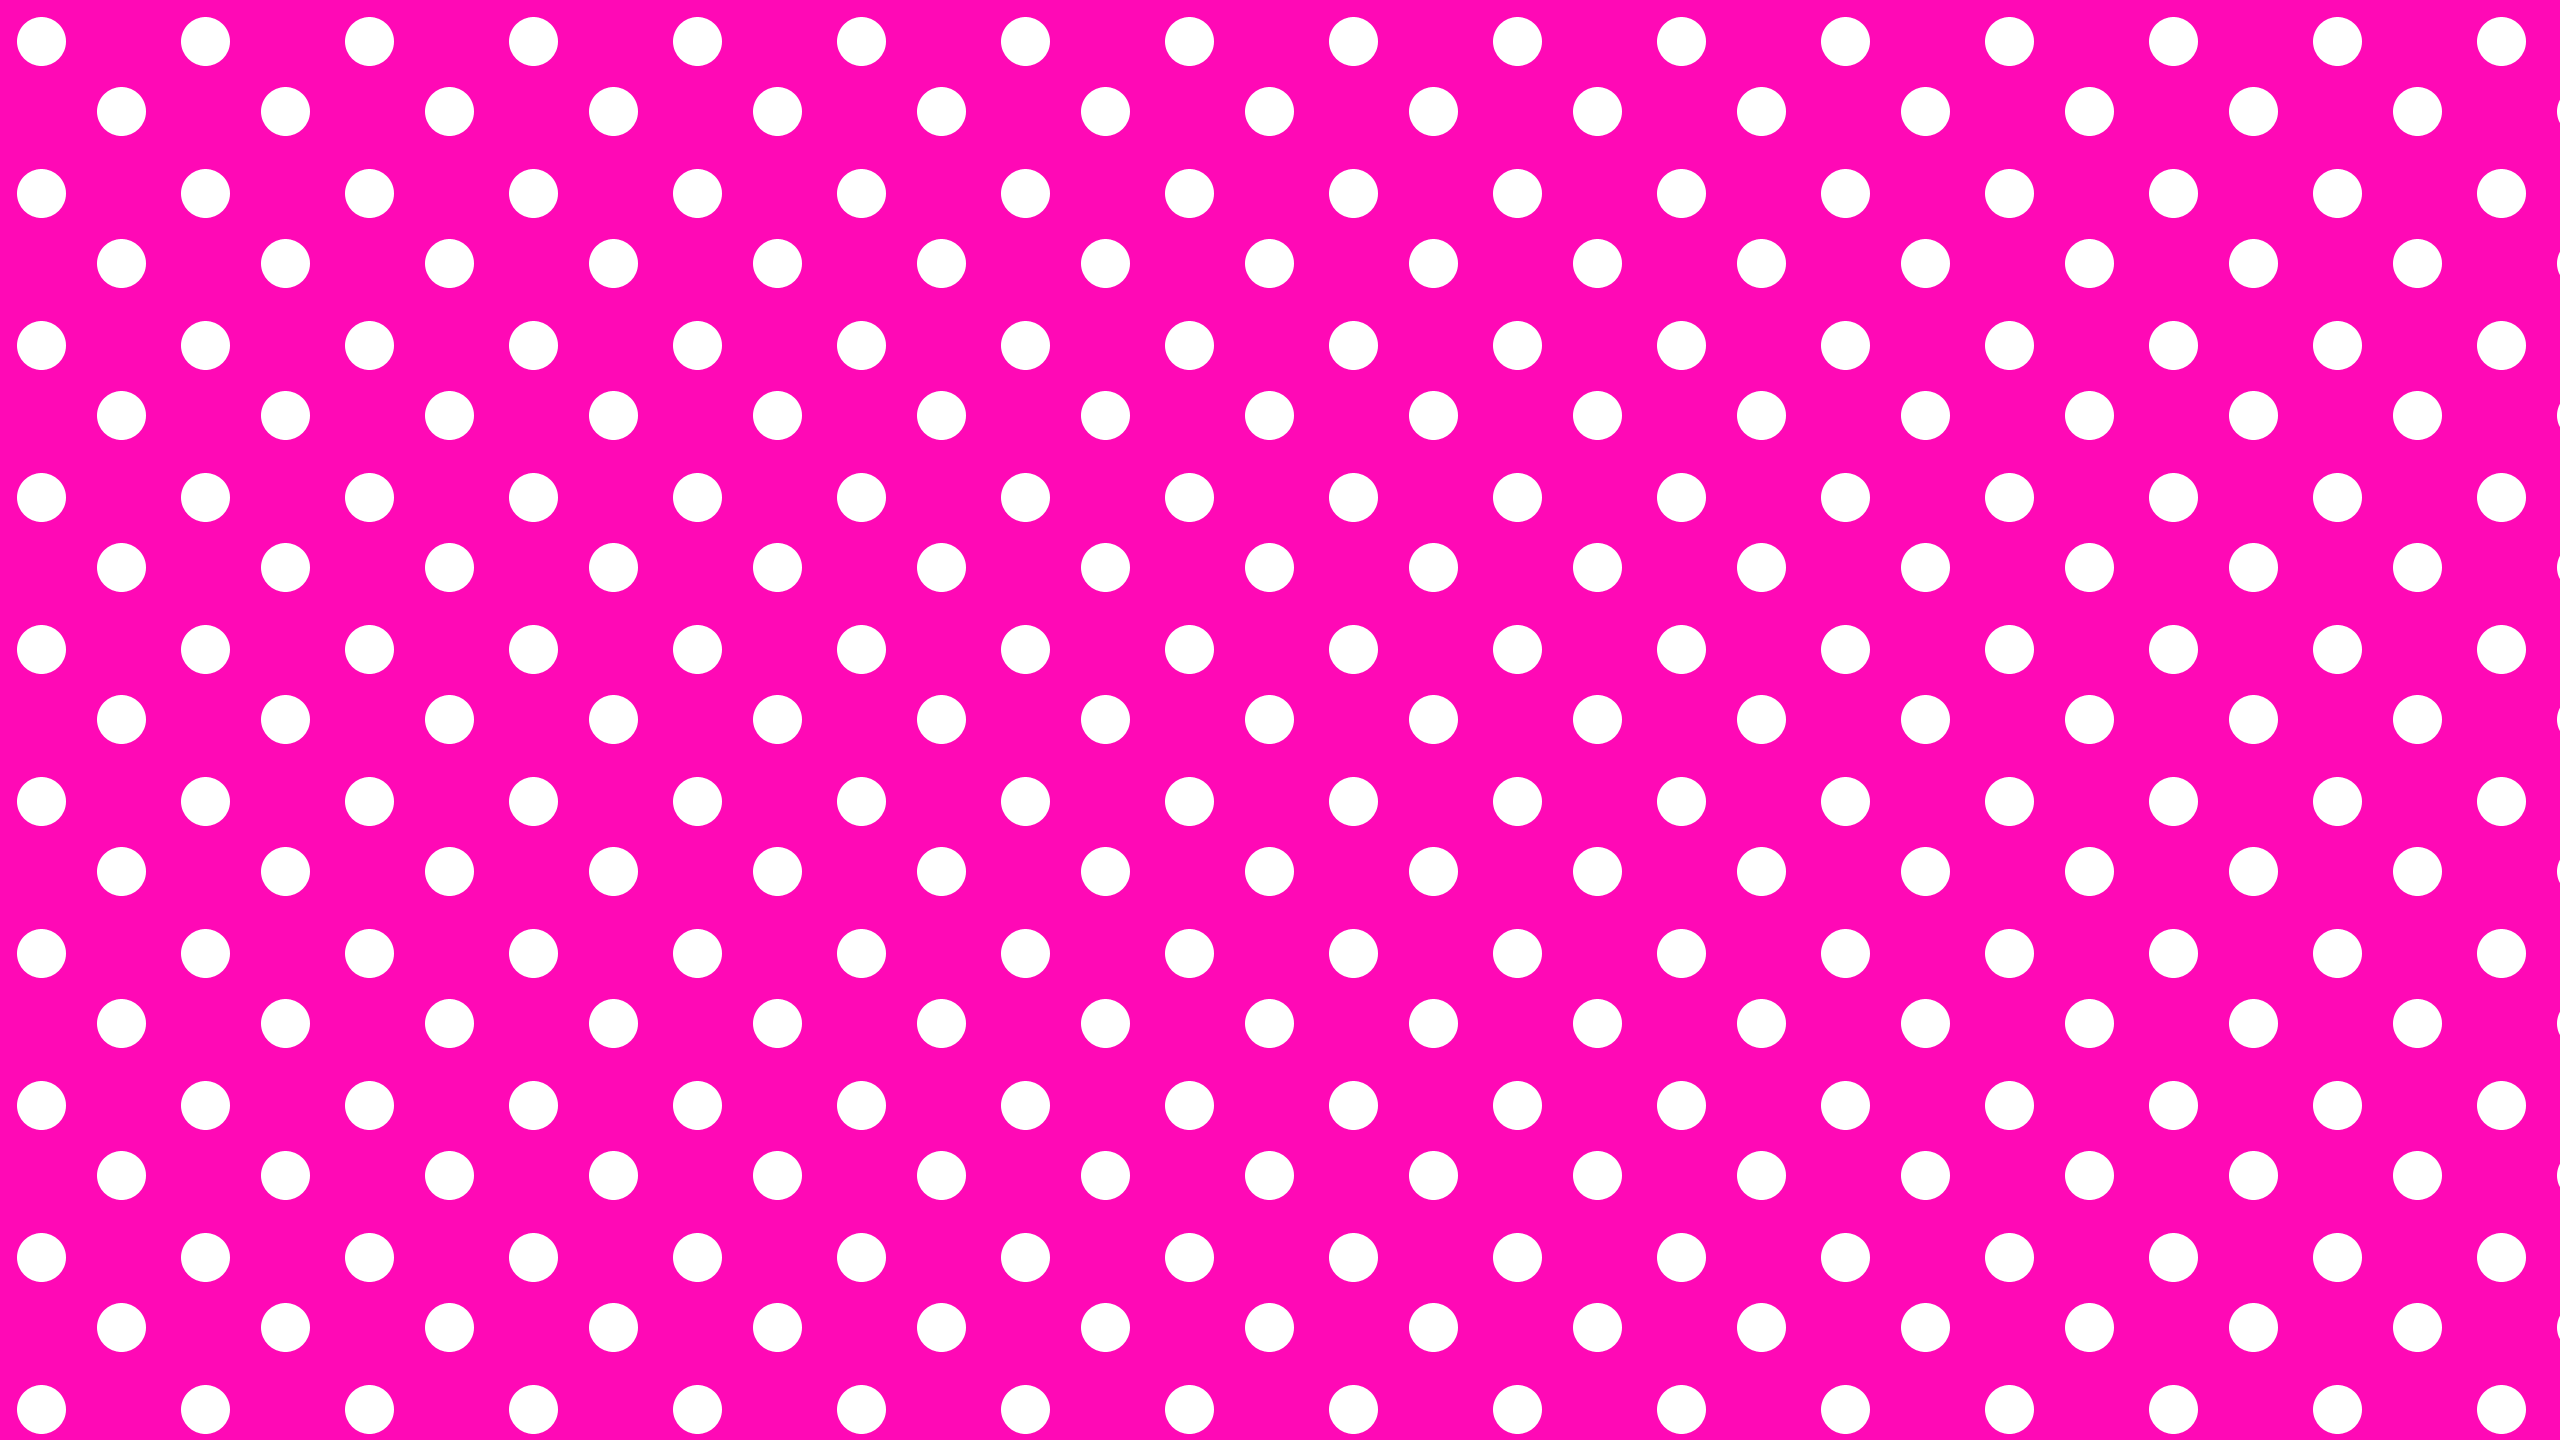 This Large Pink Desktop Wallpaper Is Easy Just Save The